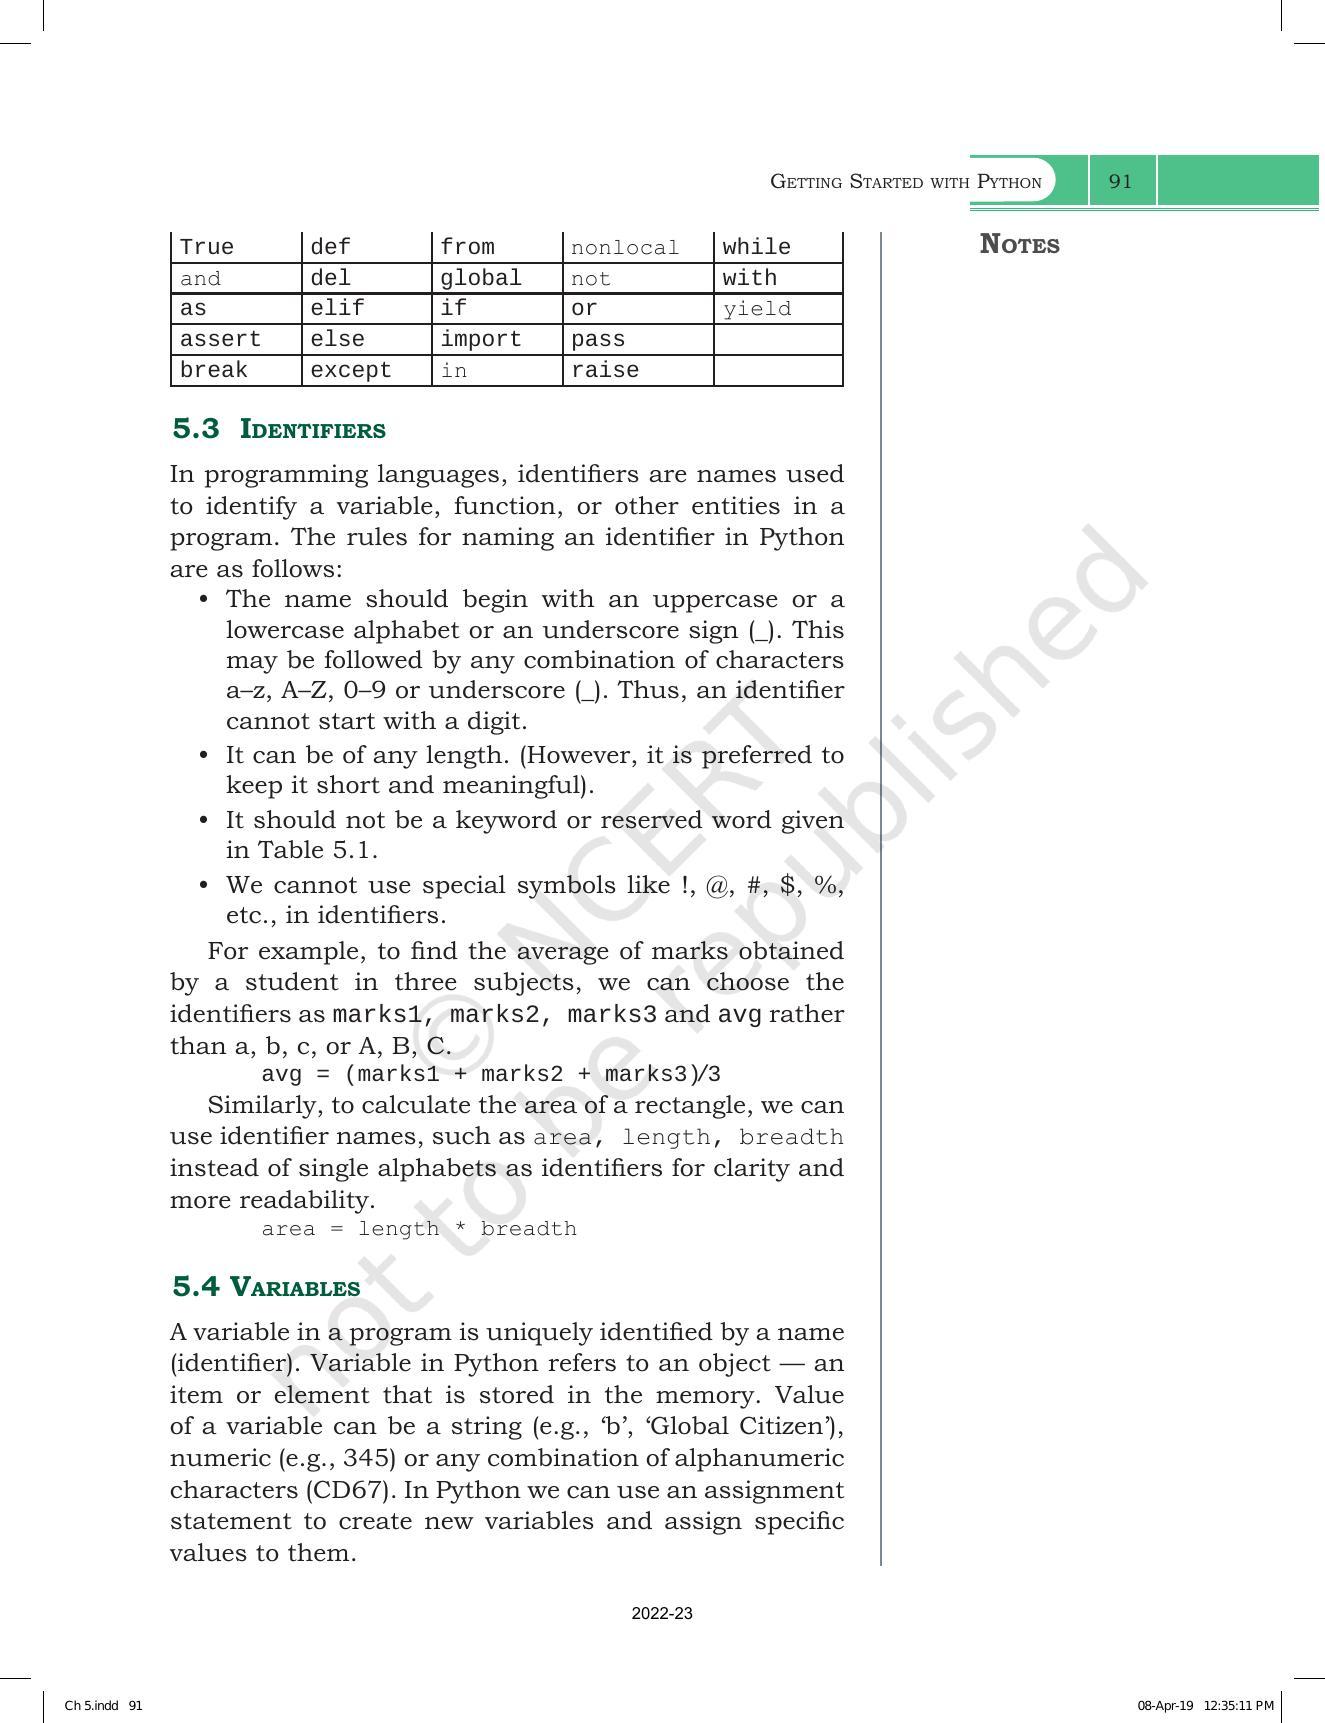 NCERT Book for Class 11 Computer Science Chapter 5 Getting Started with Python - Page 5